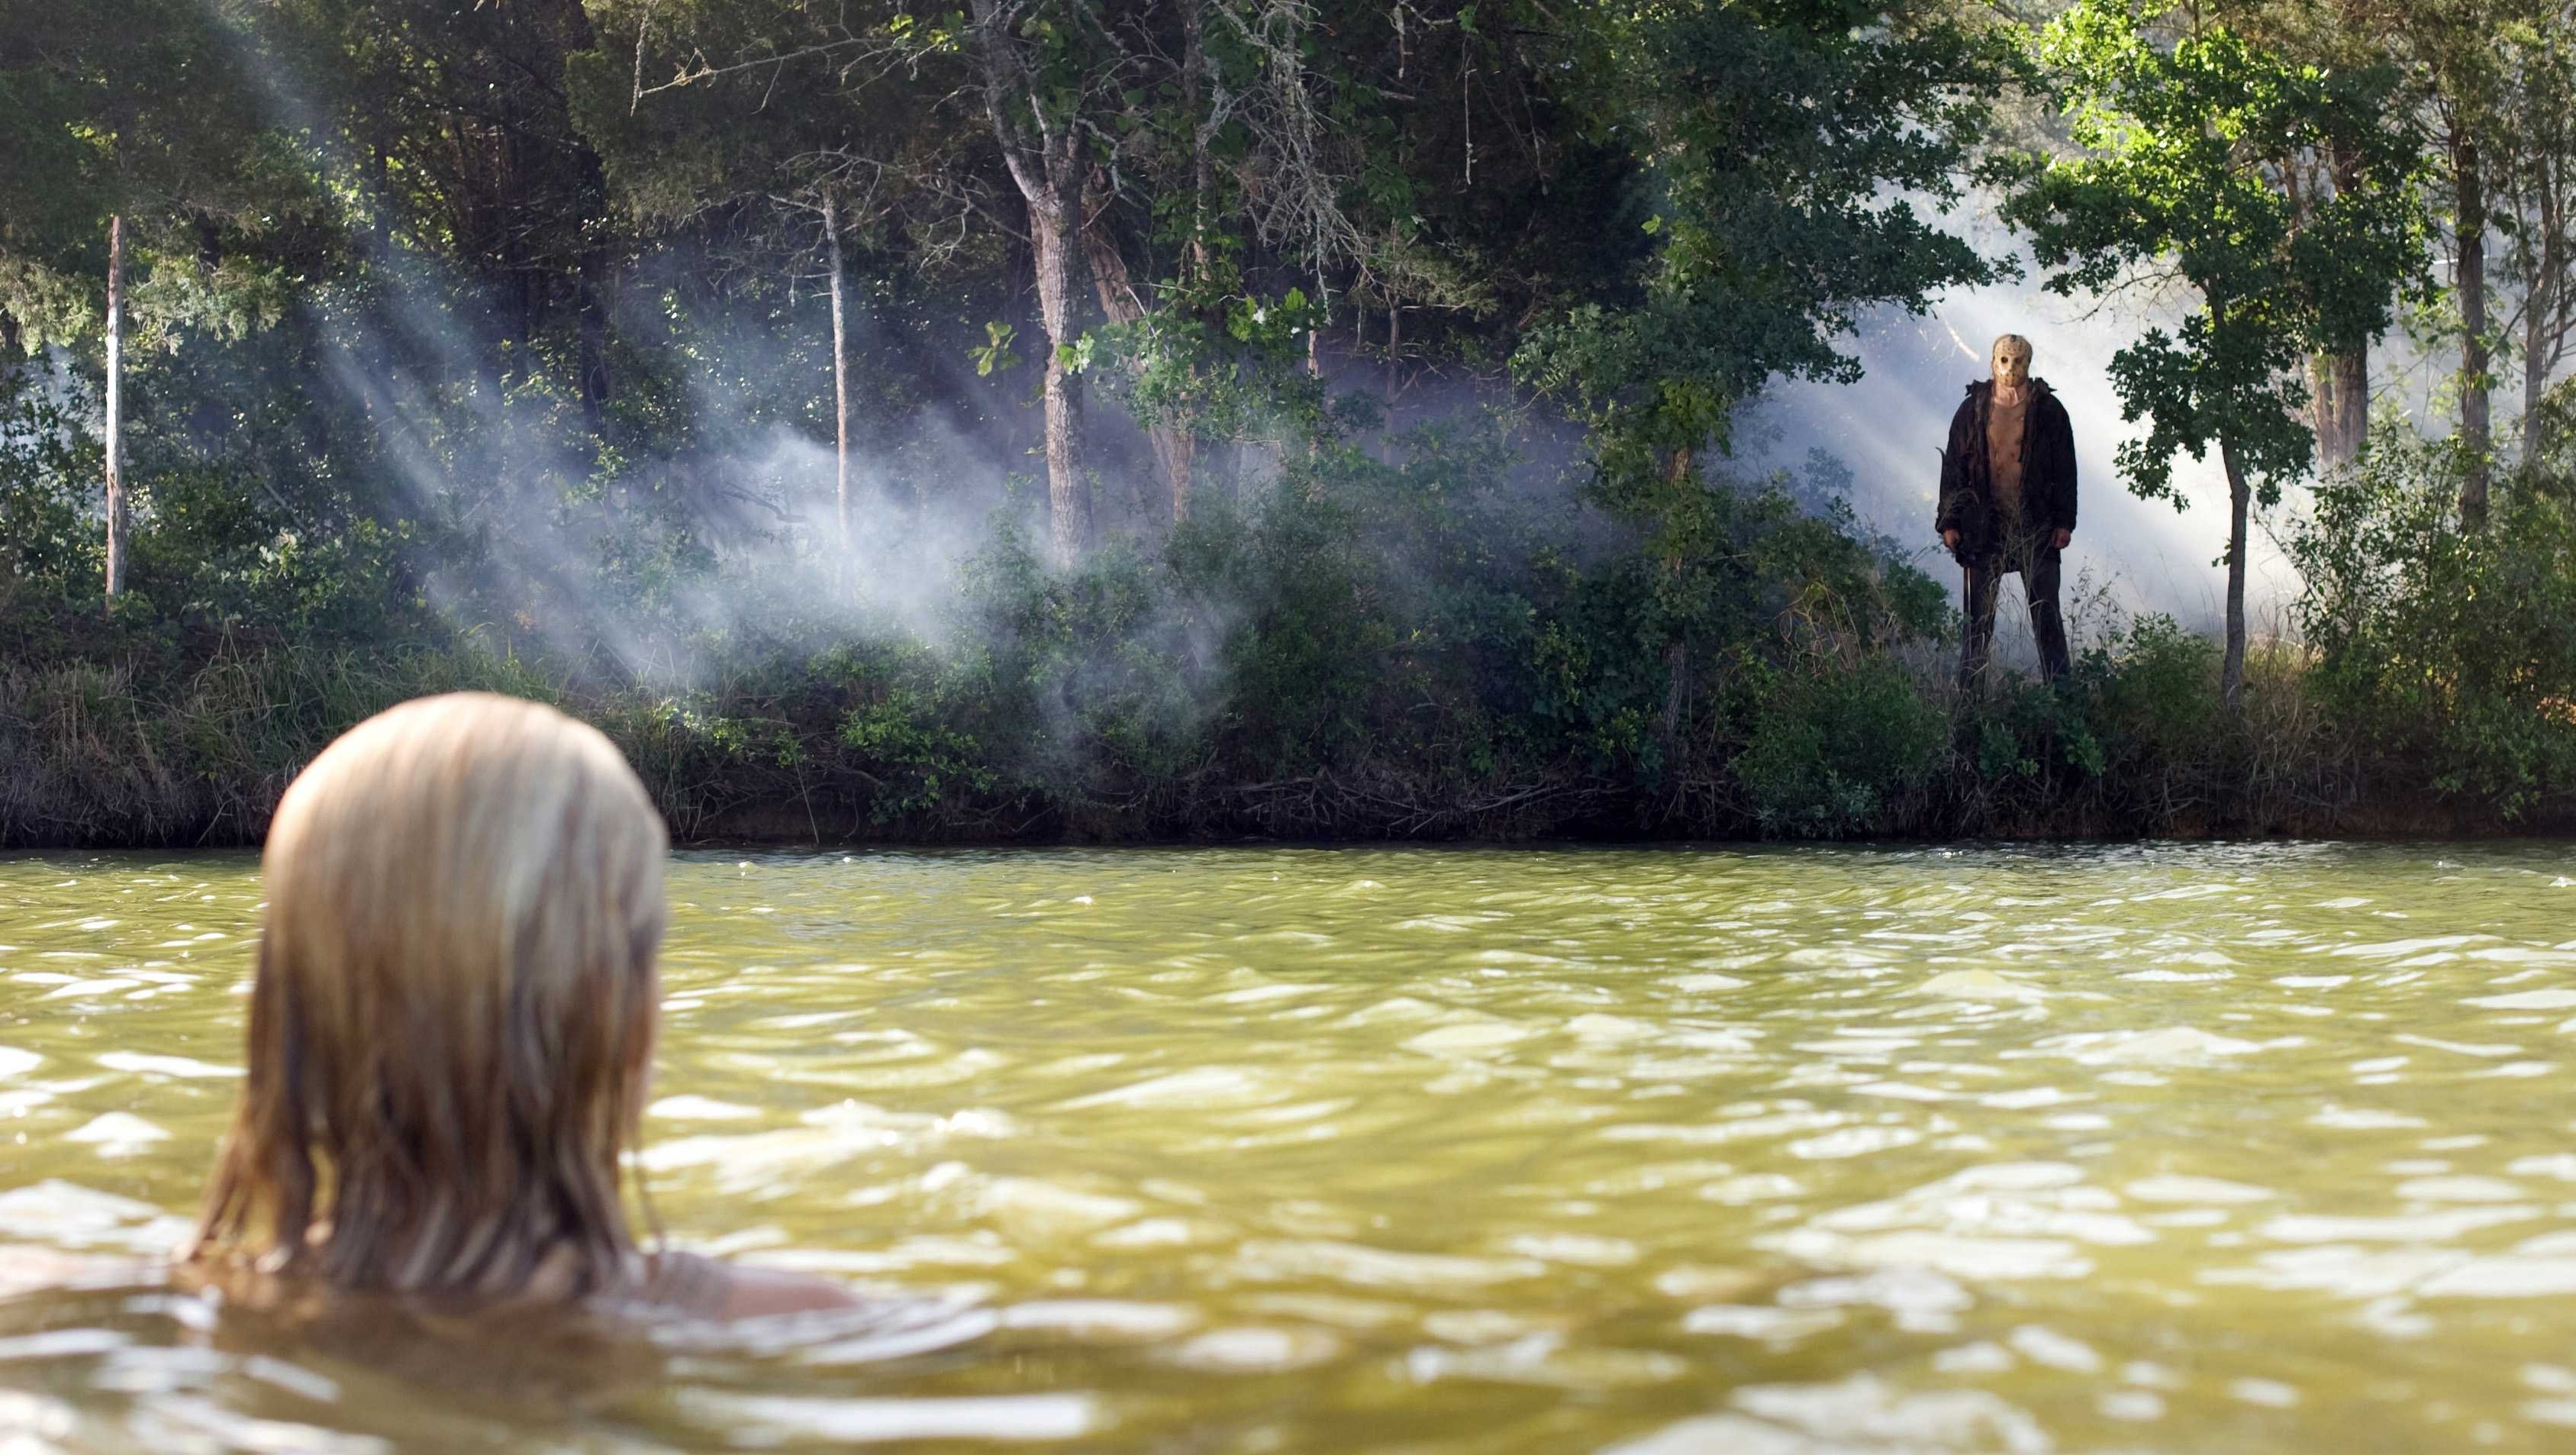 New Friday The 13th Movie Is A Total Reboot, Will Be Released In March 2015  – Bleeding Cool News And Rumors